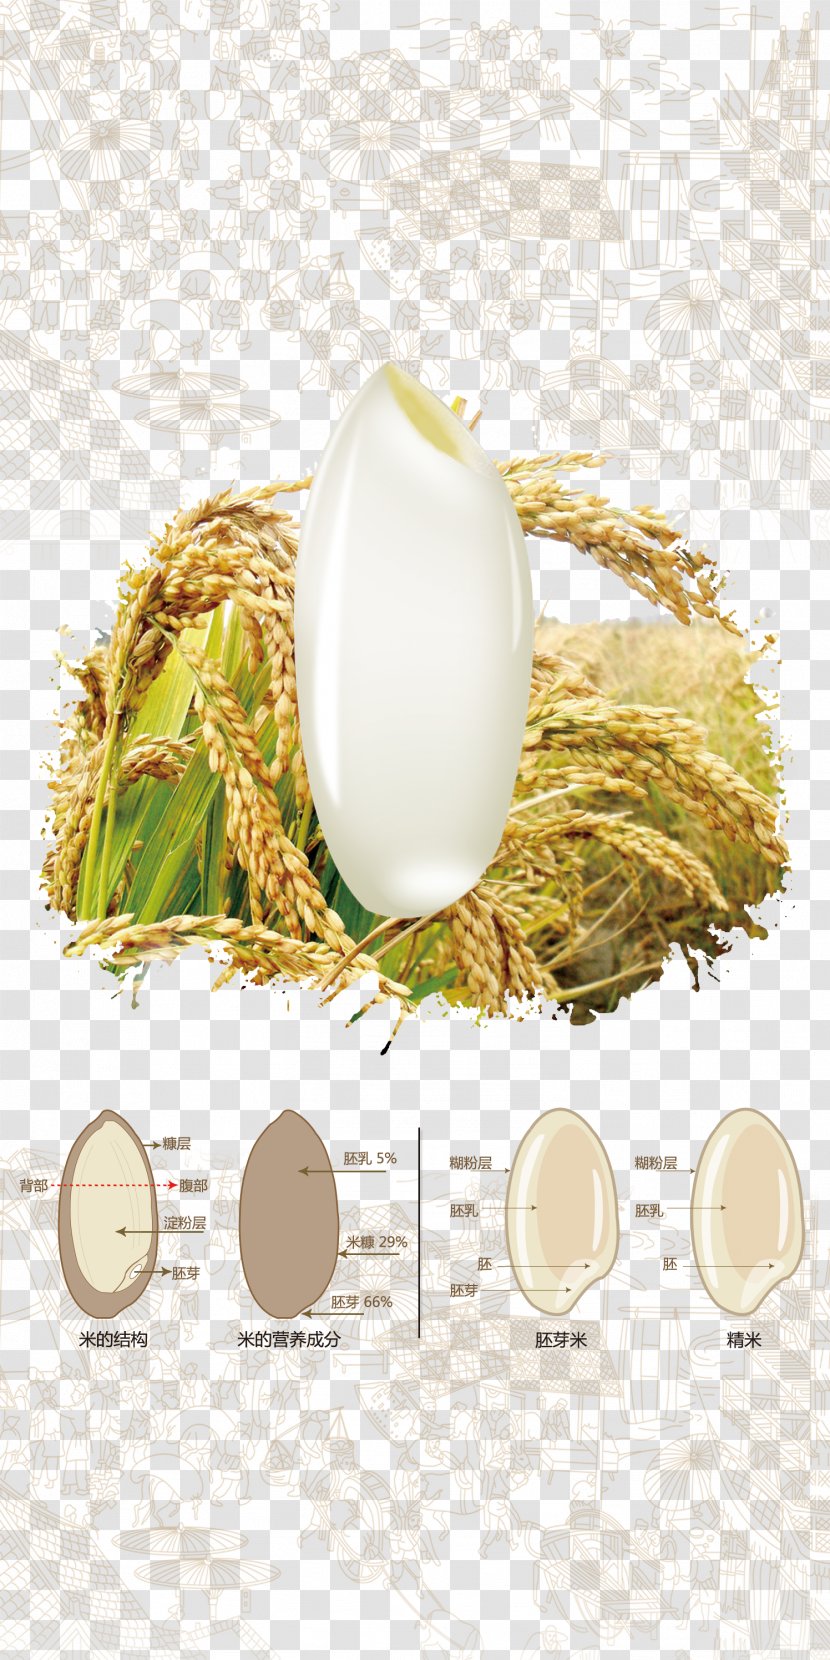 Oryza Sativa Rice Cereal Paddy Field - Particles Transparent PNG